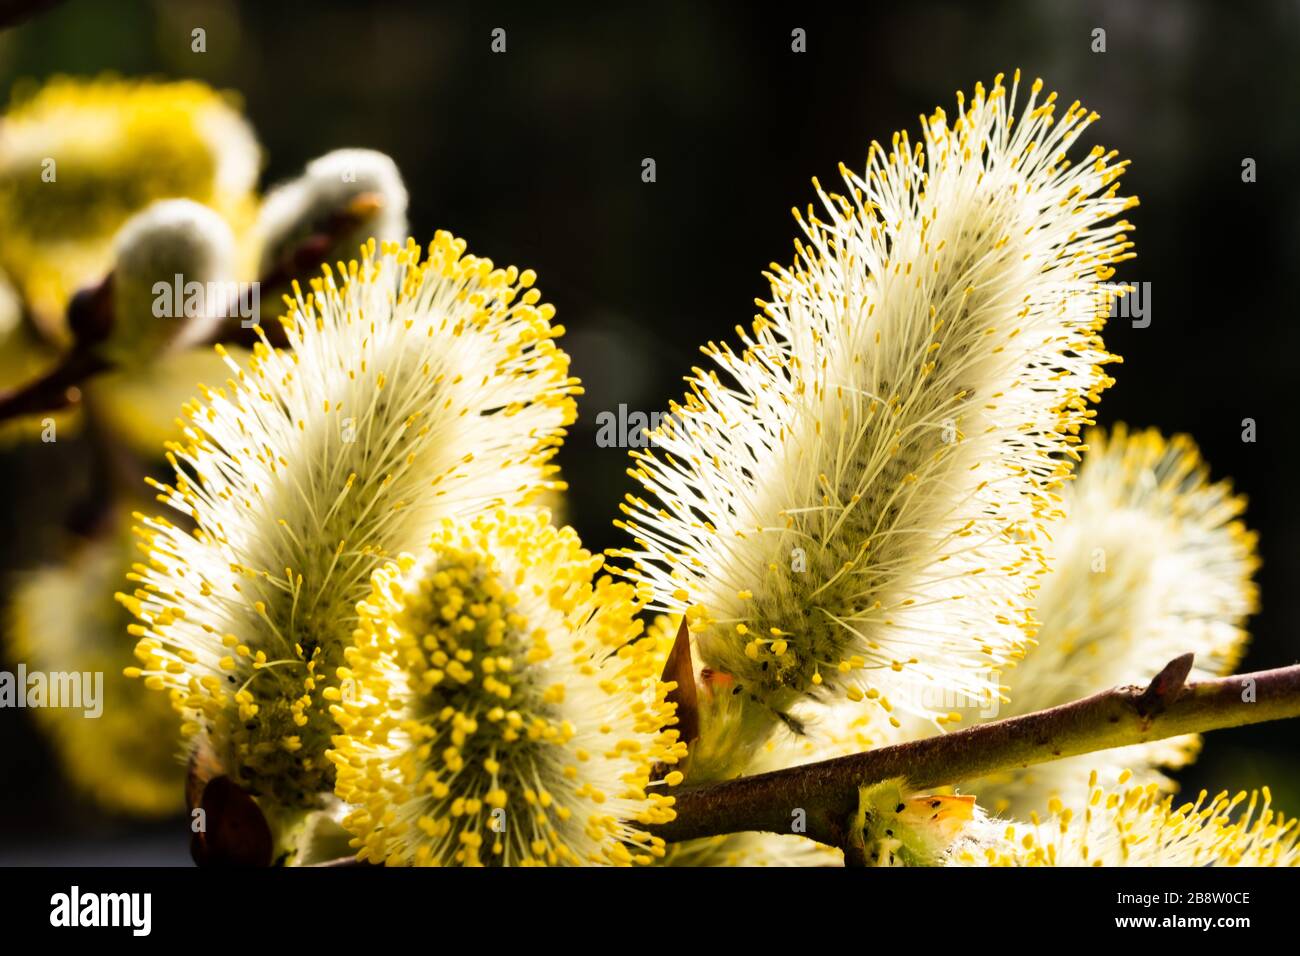 Weeping willow catkin blossom. Salix in yellow flower Stock Photo